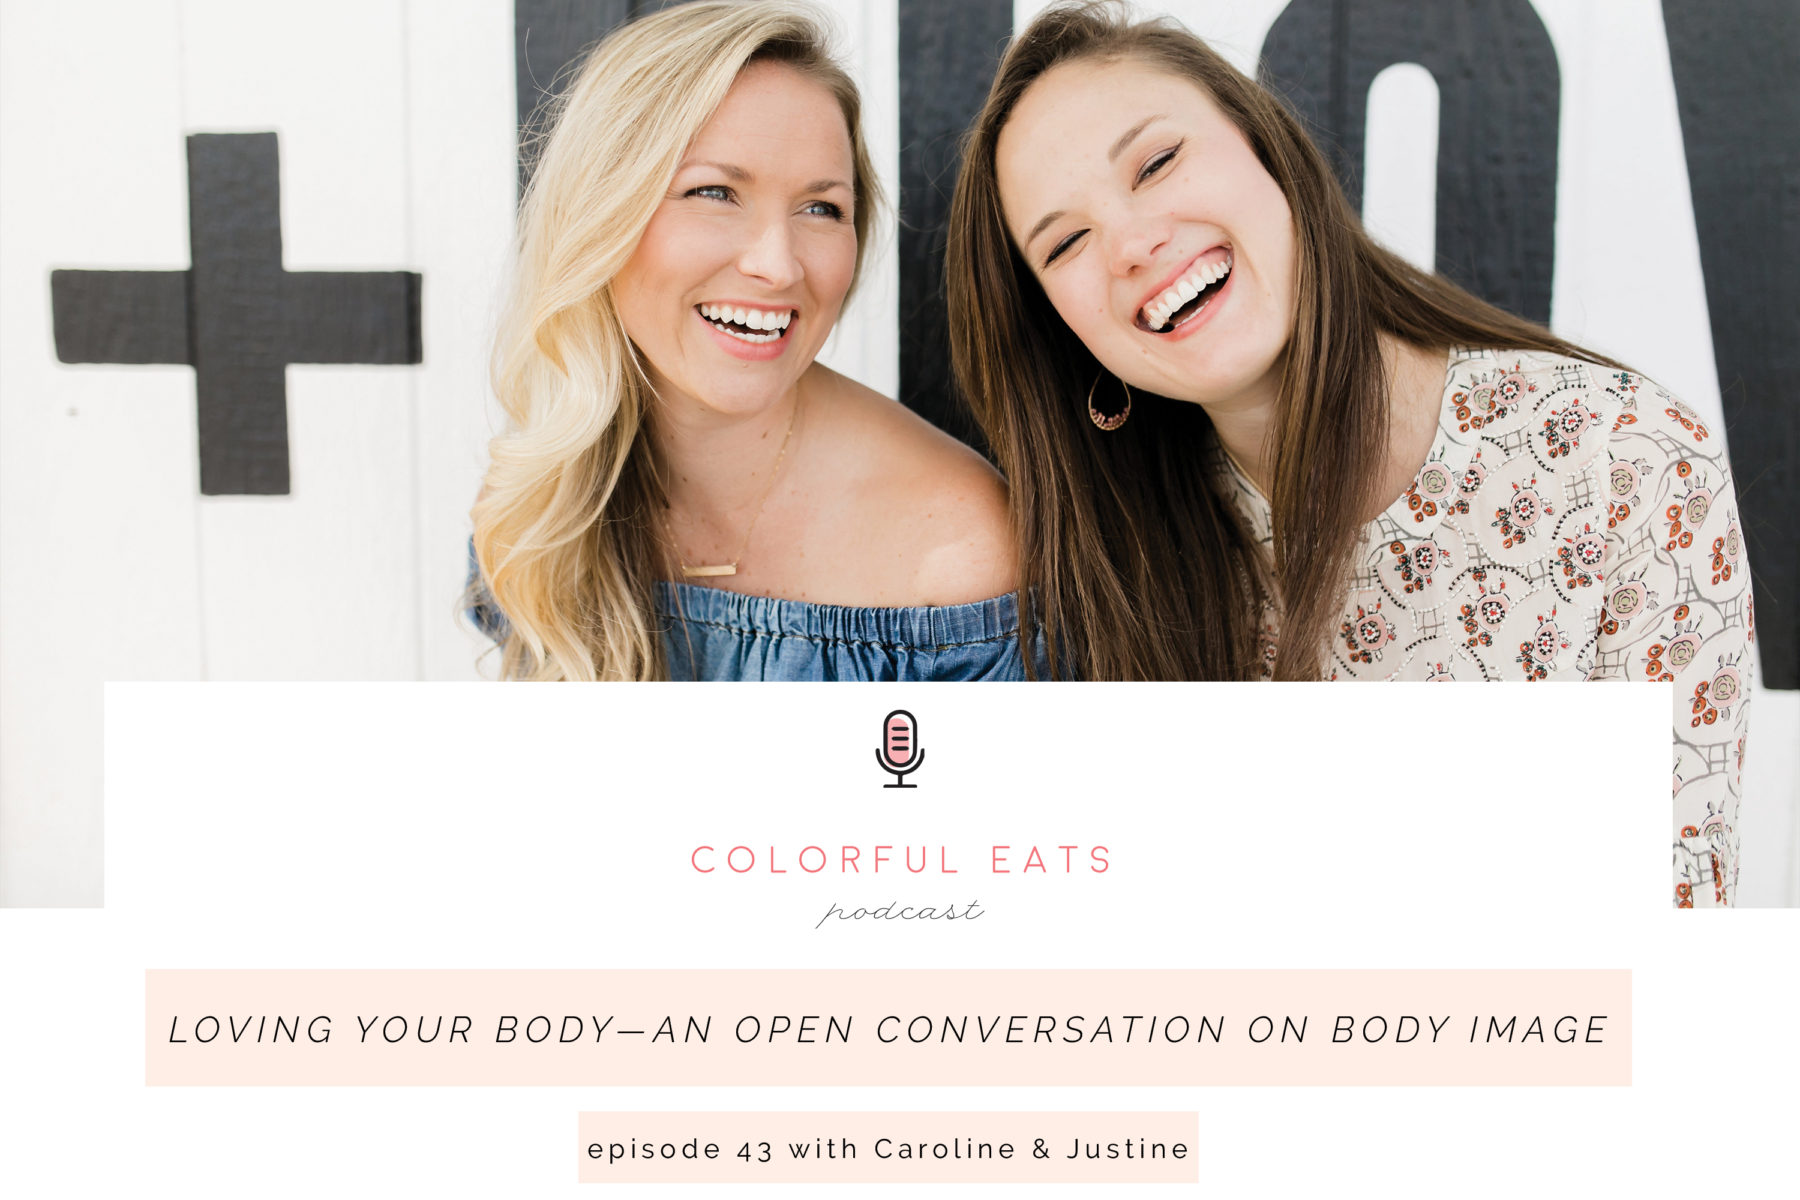 Colorful Eats Podcast Episode 43: Loving Your Body—An Open Conversation on Body Image